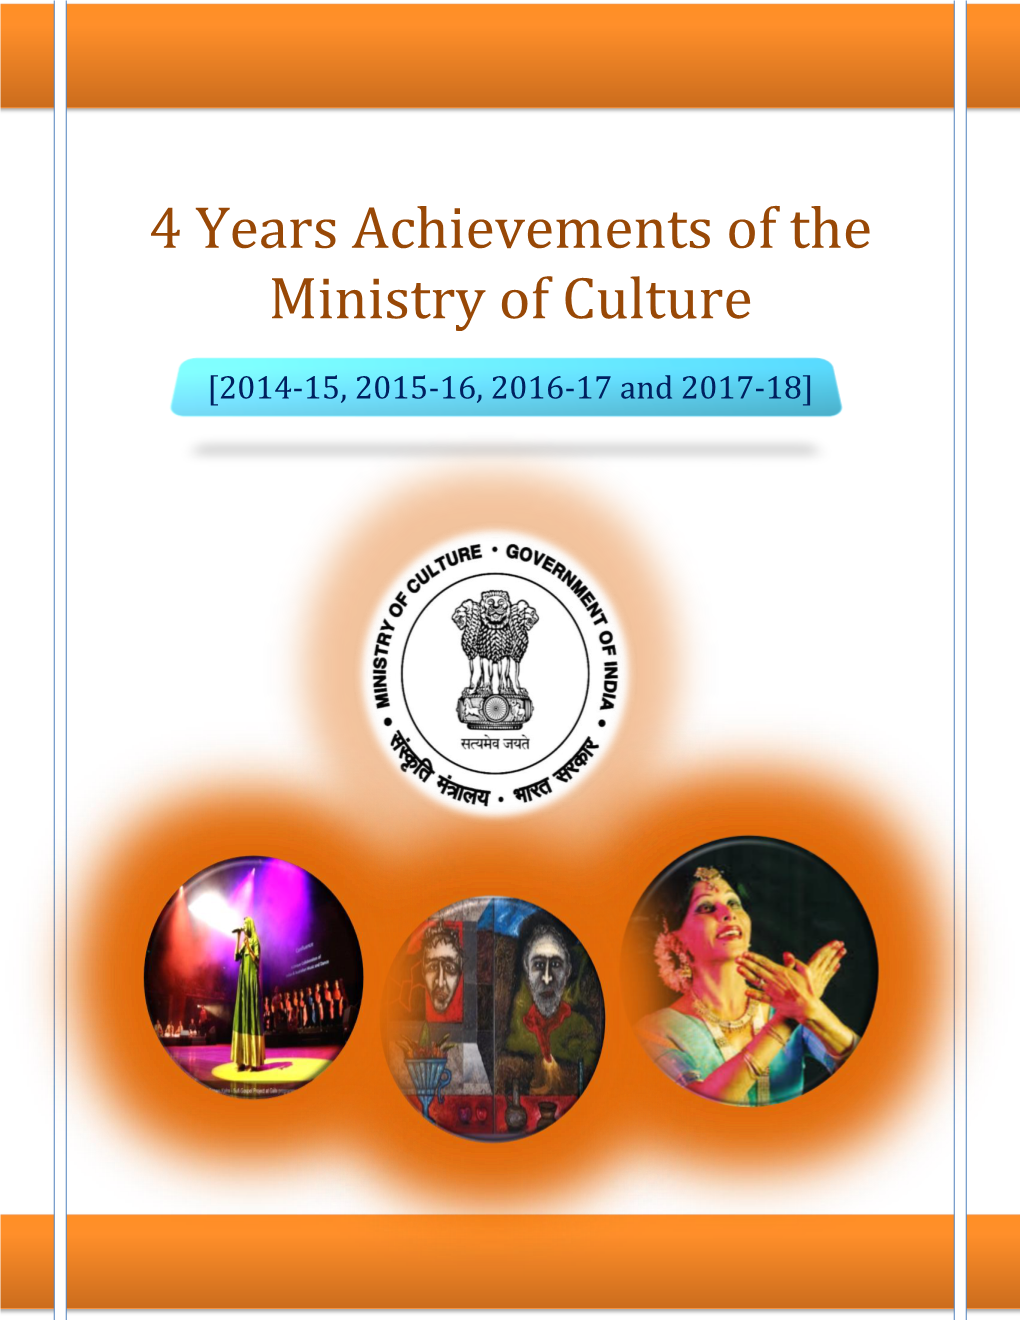 4 Years Achievements of the Ministry of Culture